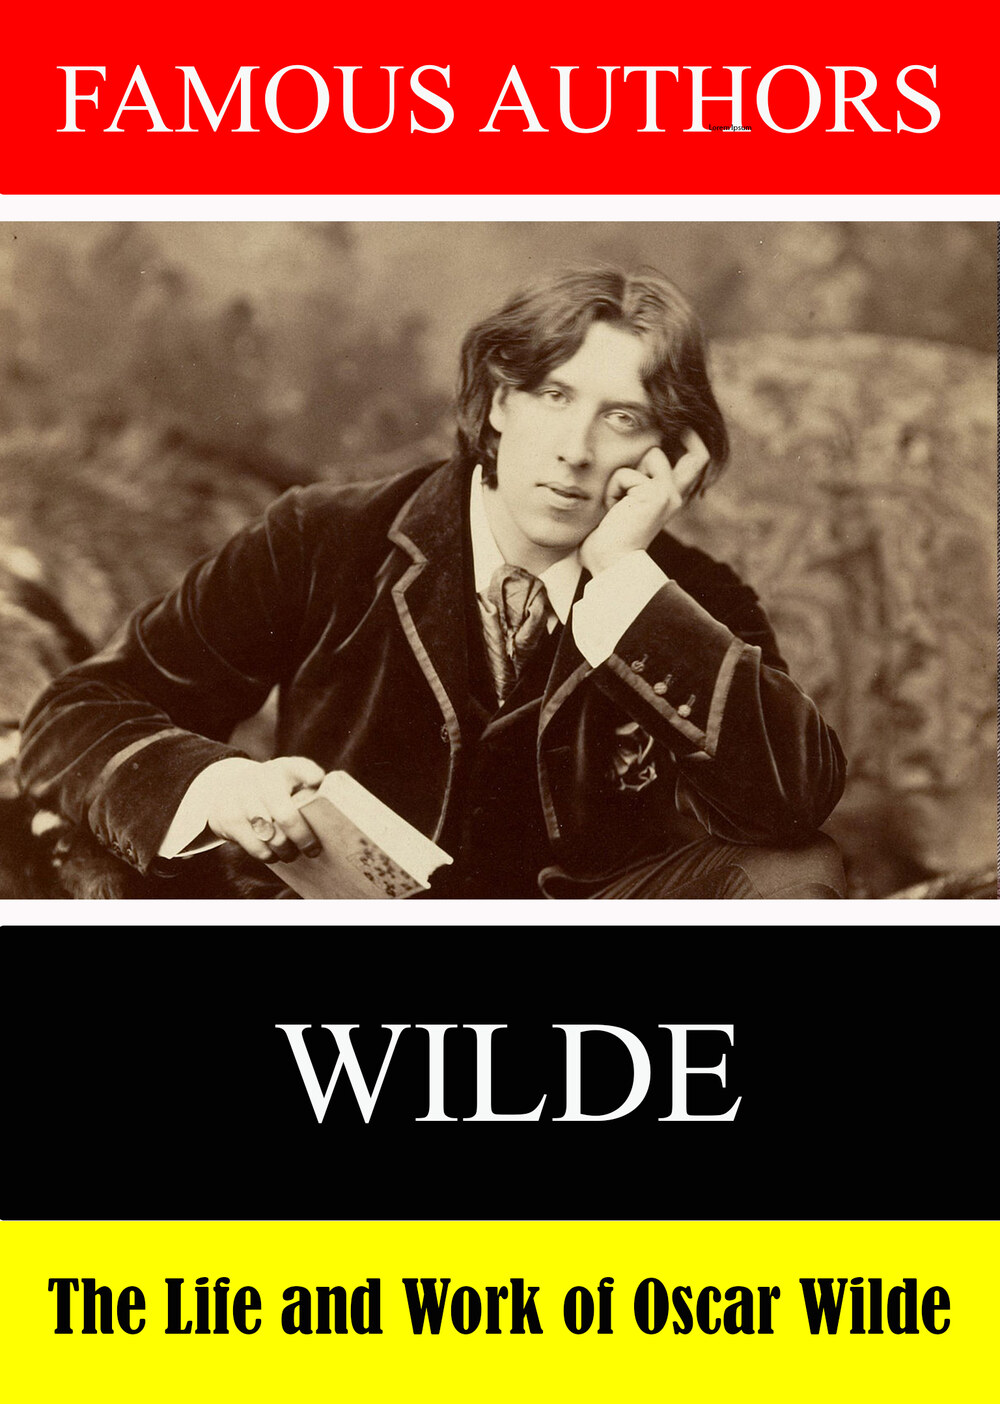 L7912 - Famous Authors:  The Life and Work of Oscar Wilde